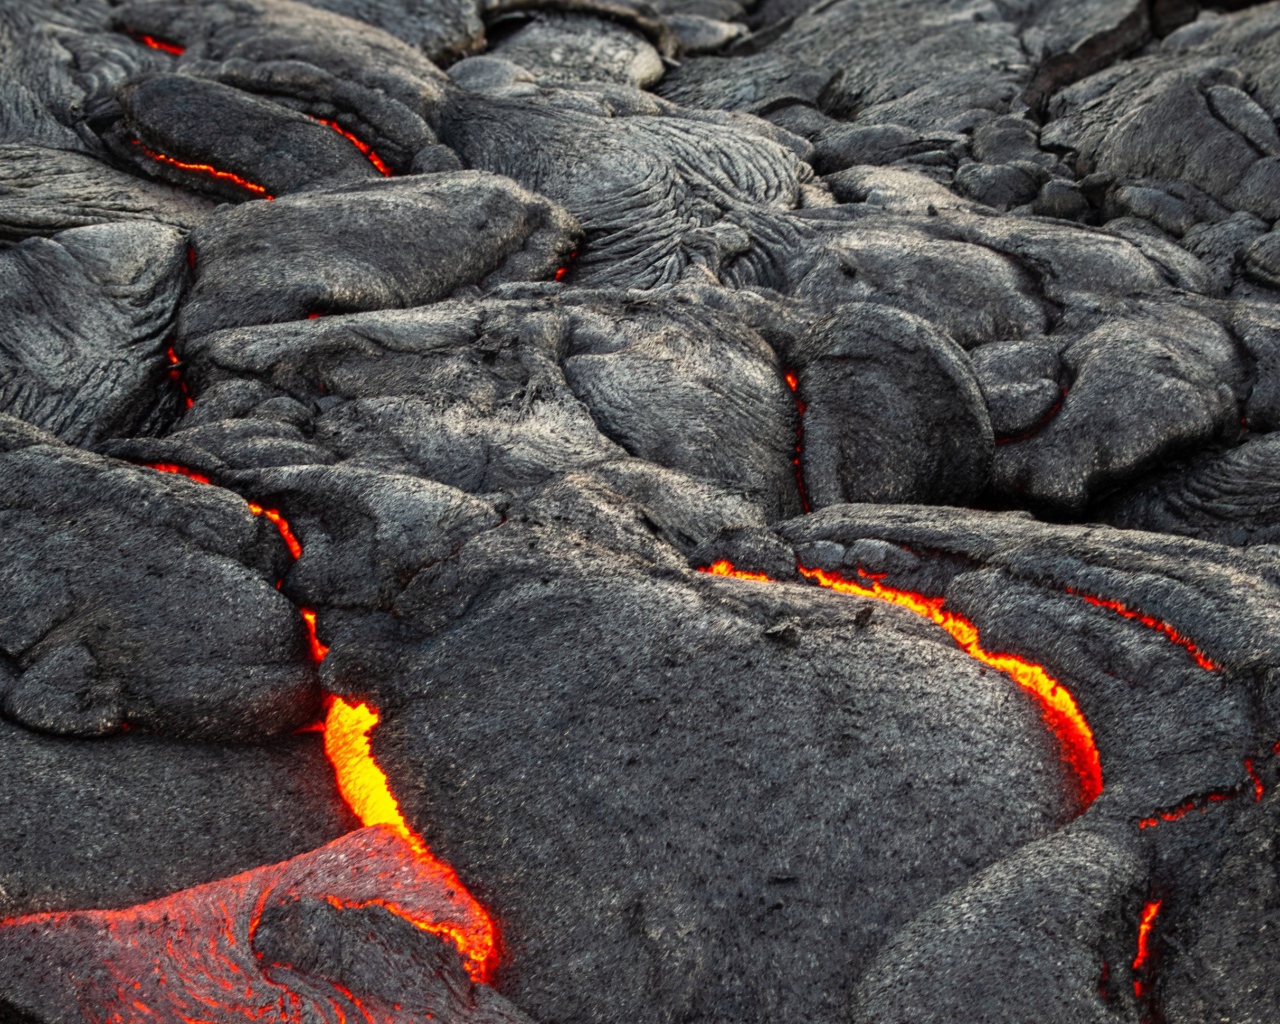 Lava makes its way through the cracks in the volcano